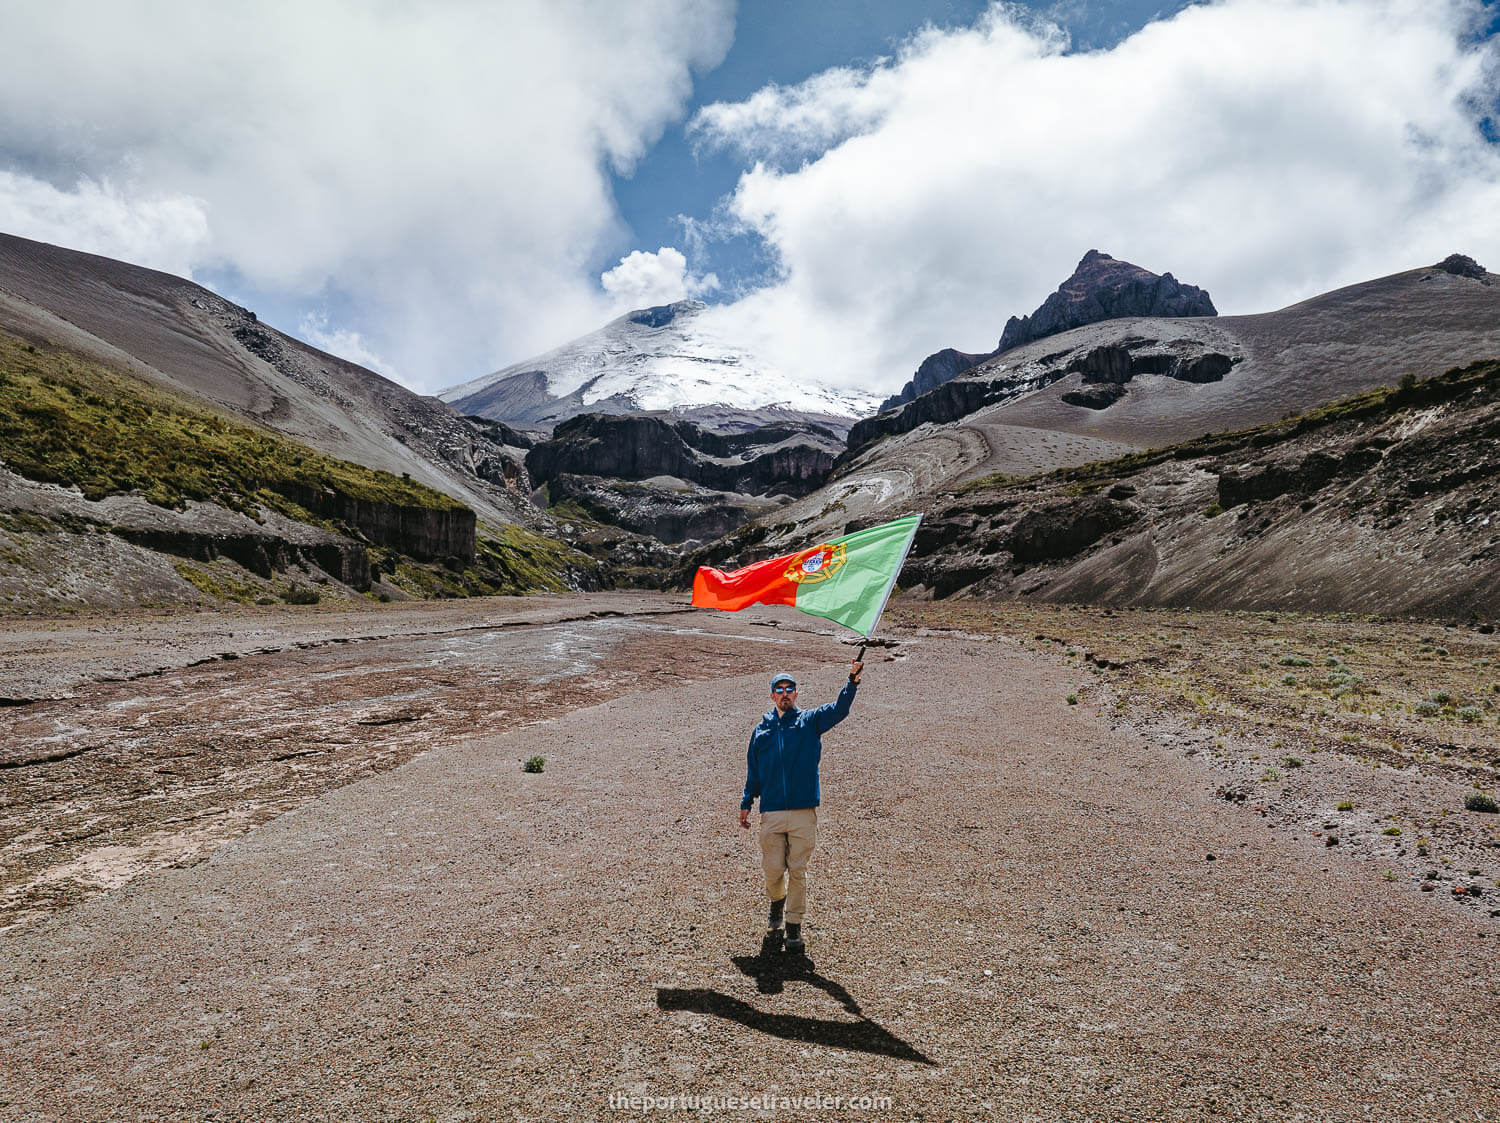 Me showing off my Portuguese flag at the Lahar of Cotopaxi Volcano